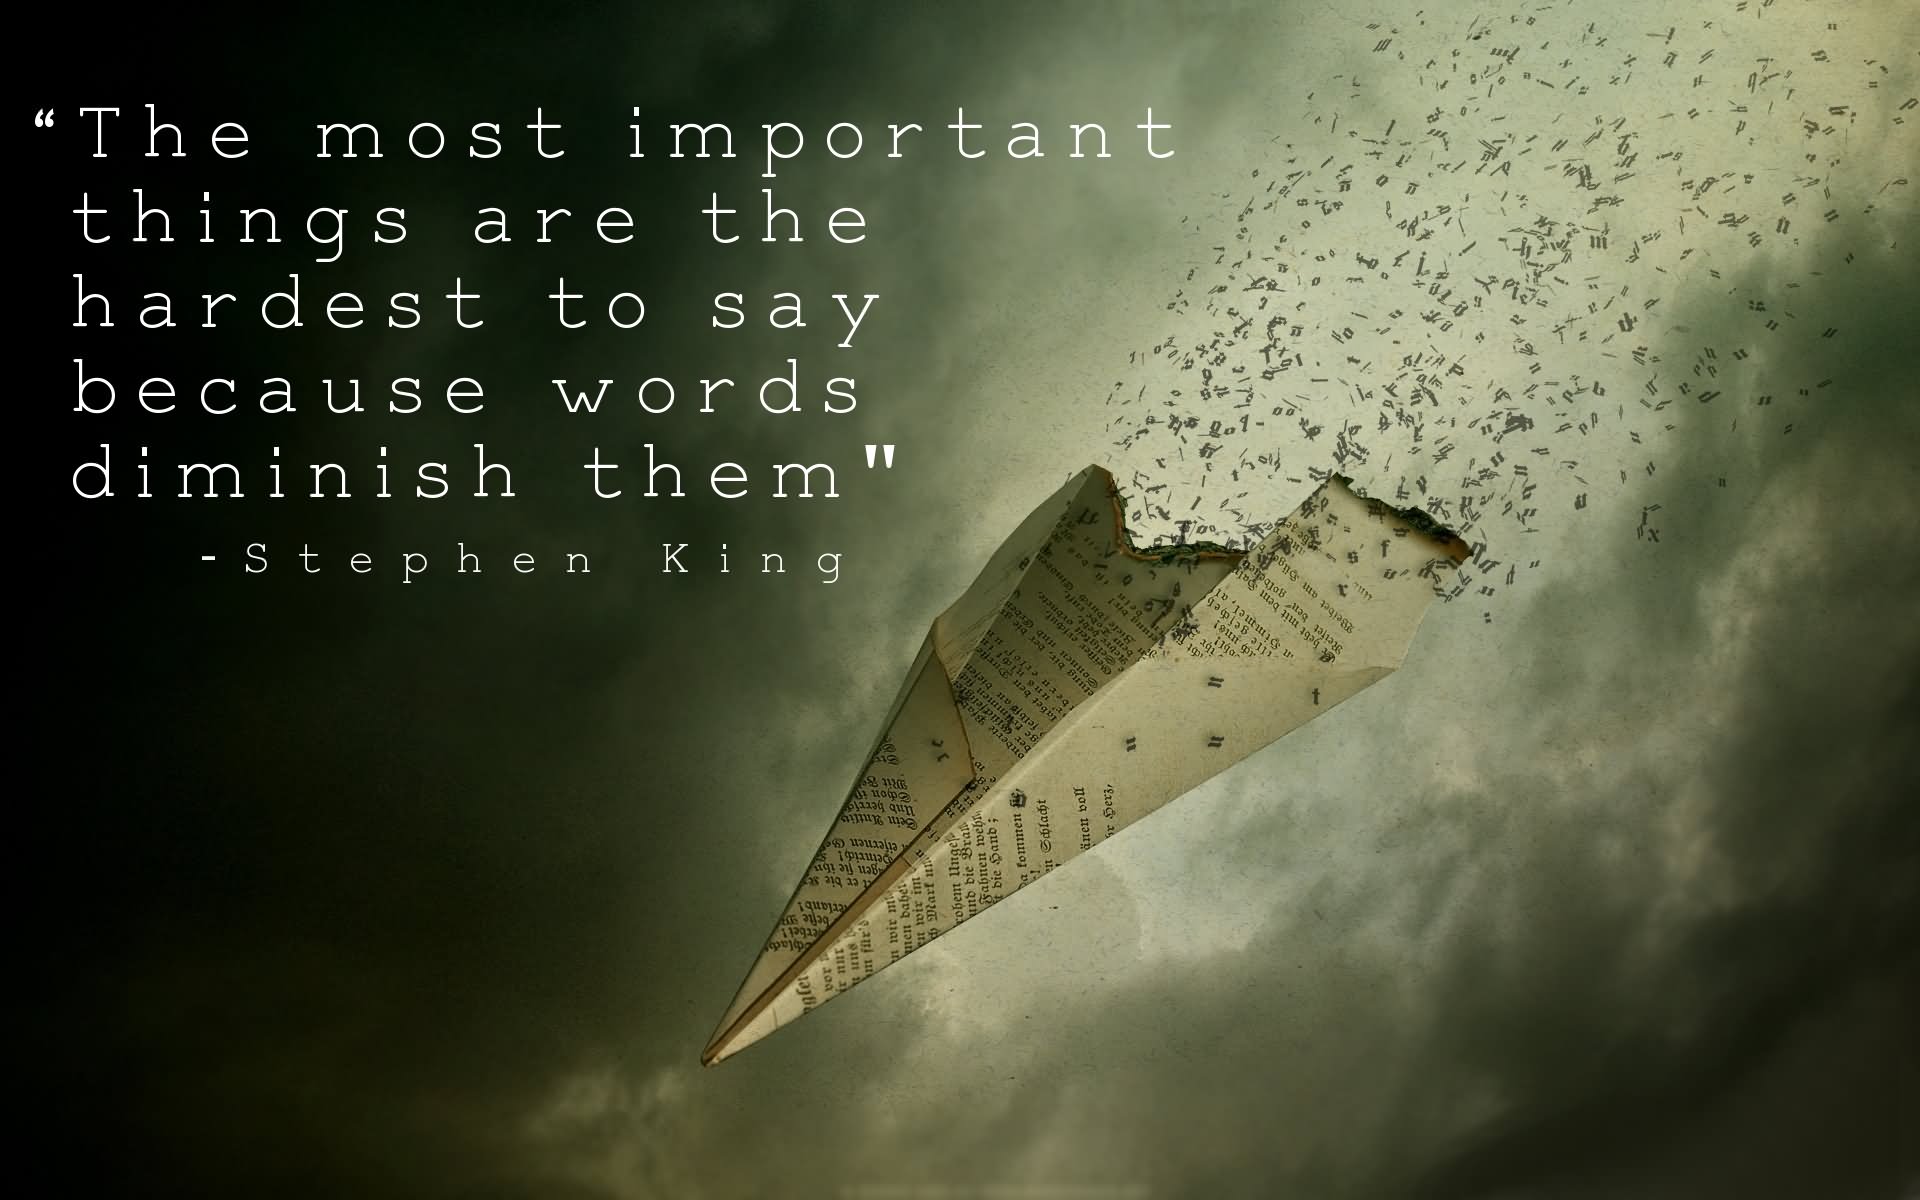 The most important things are the hardest to say, because words diminish them.